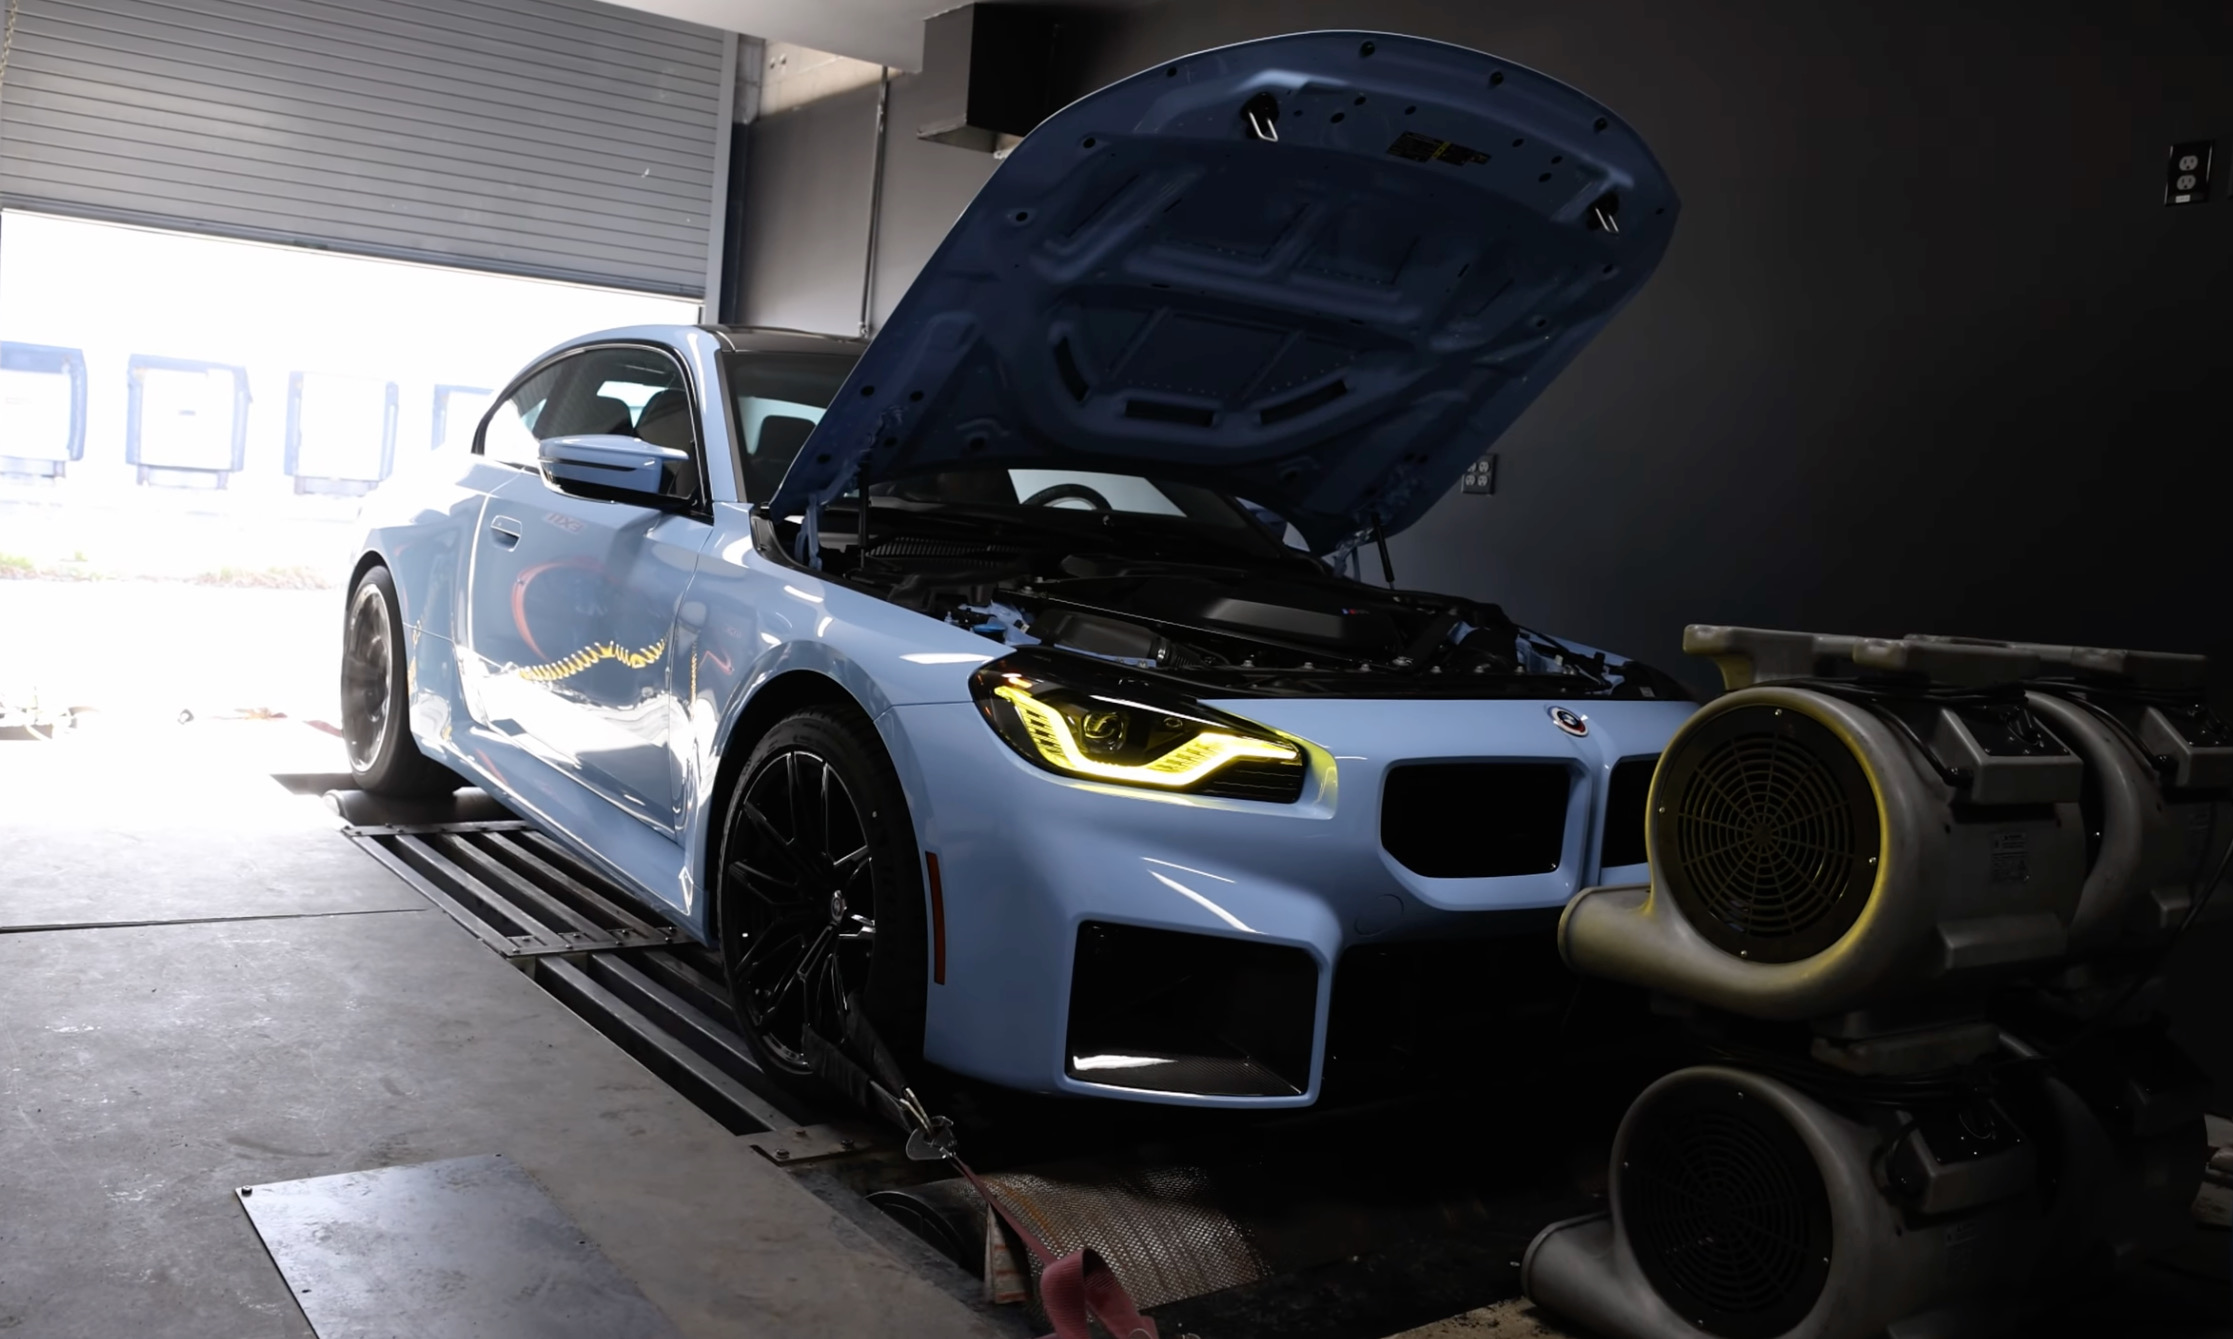 stock 2023 bmw m2 produces 342kw at the wheels in dyno test (video)